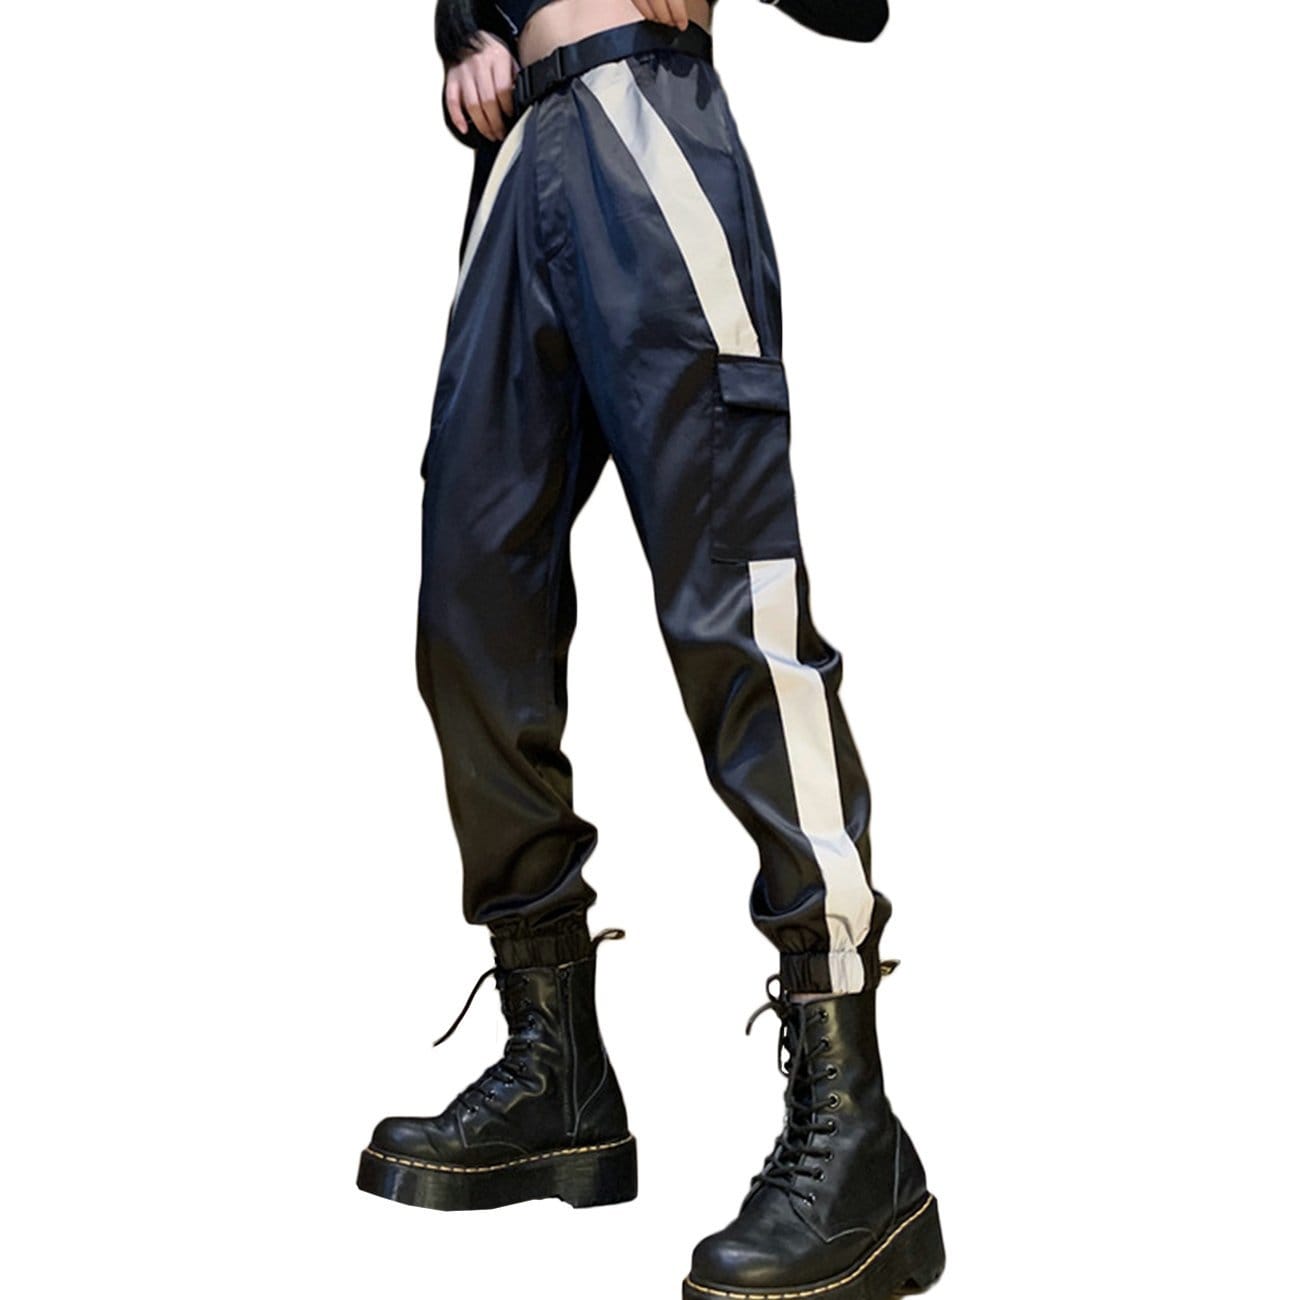 TO Reflective Strip Cargo Pants